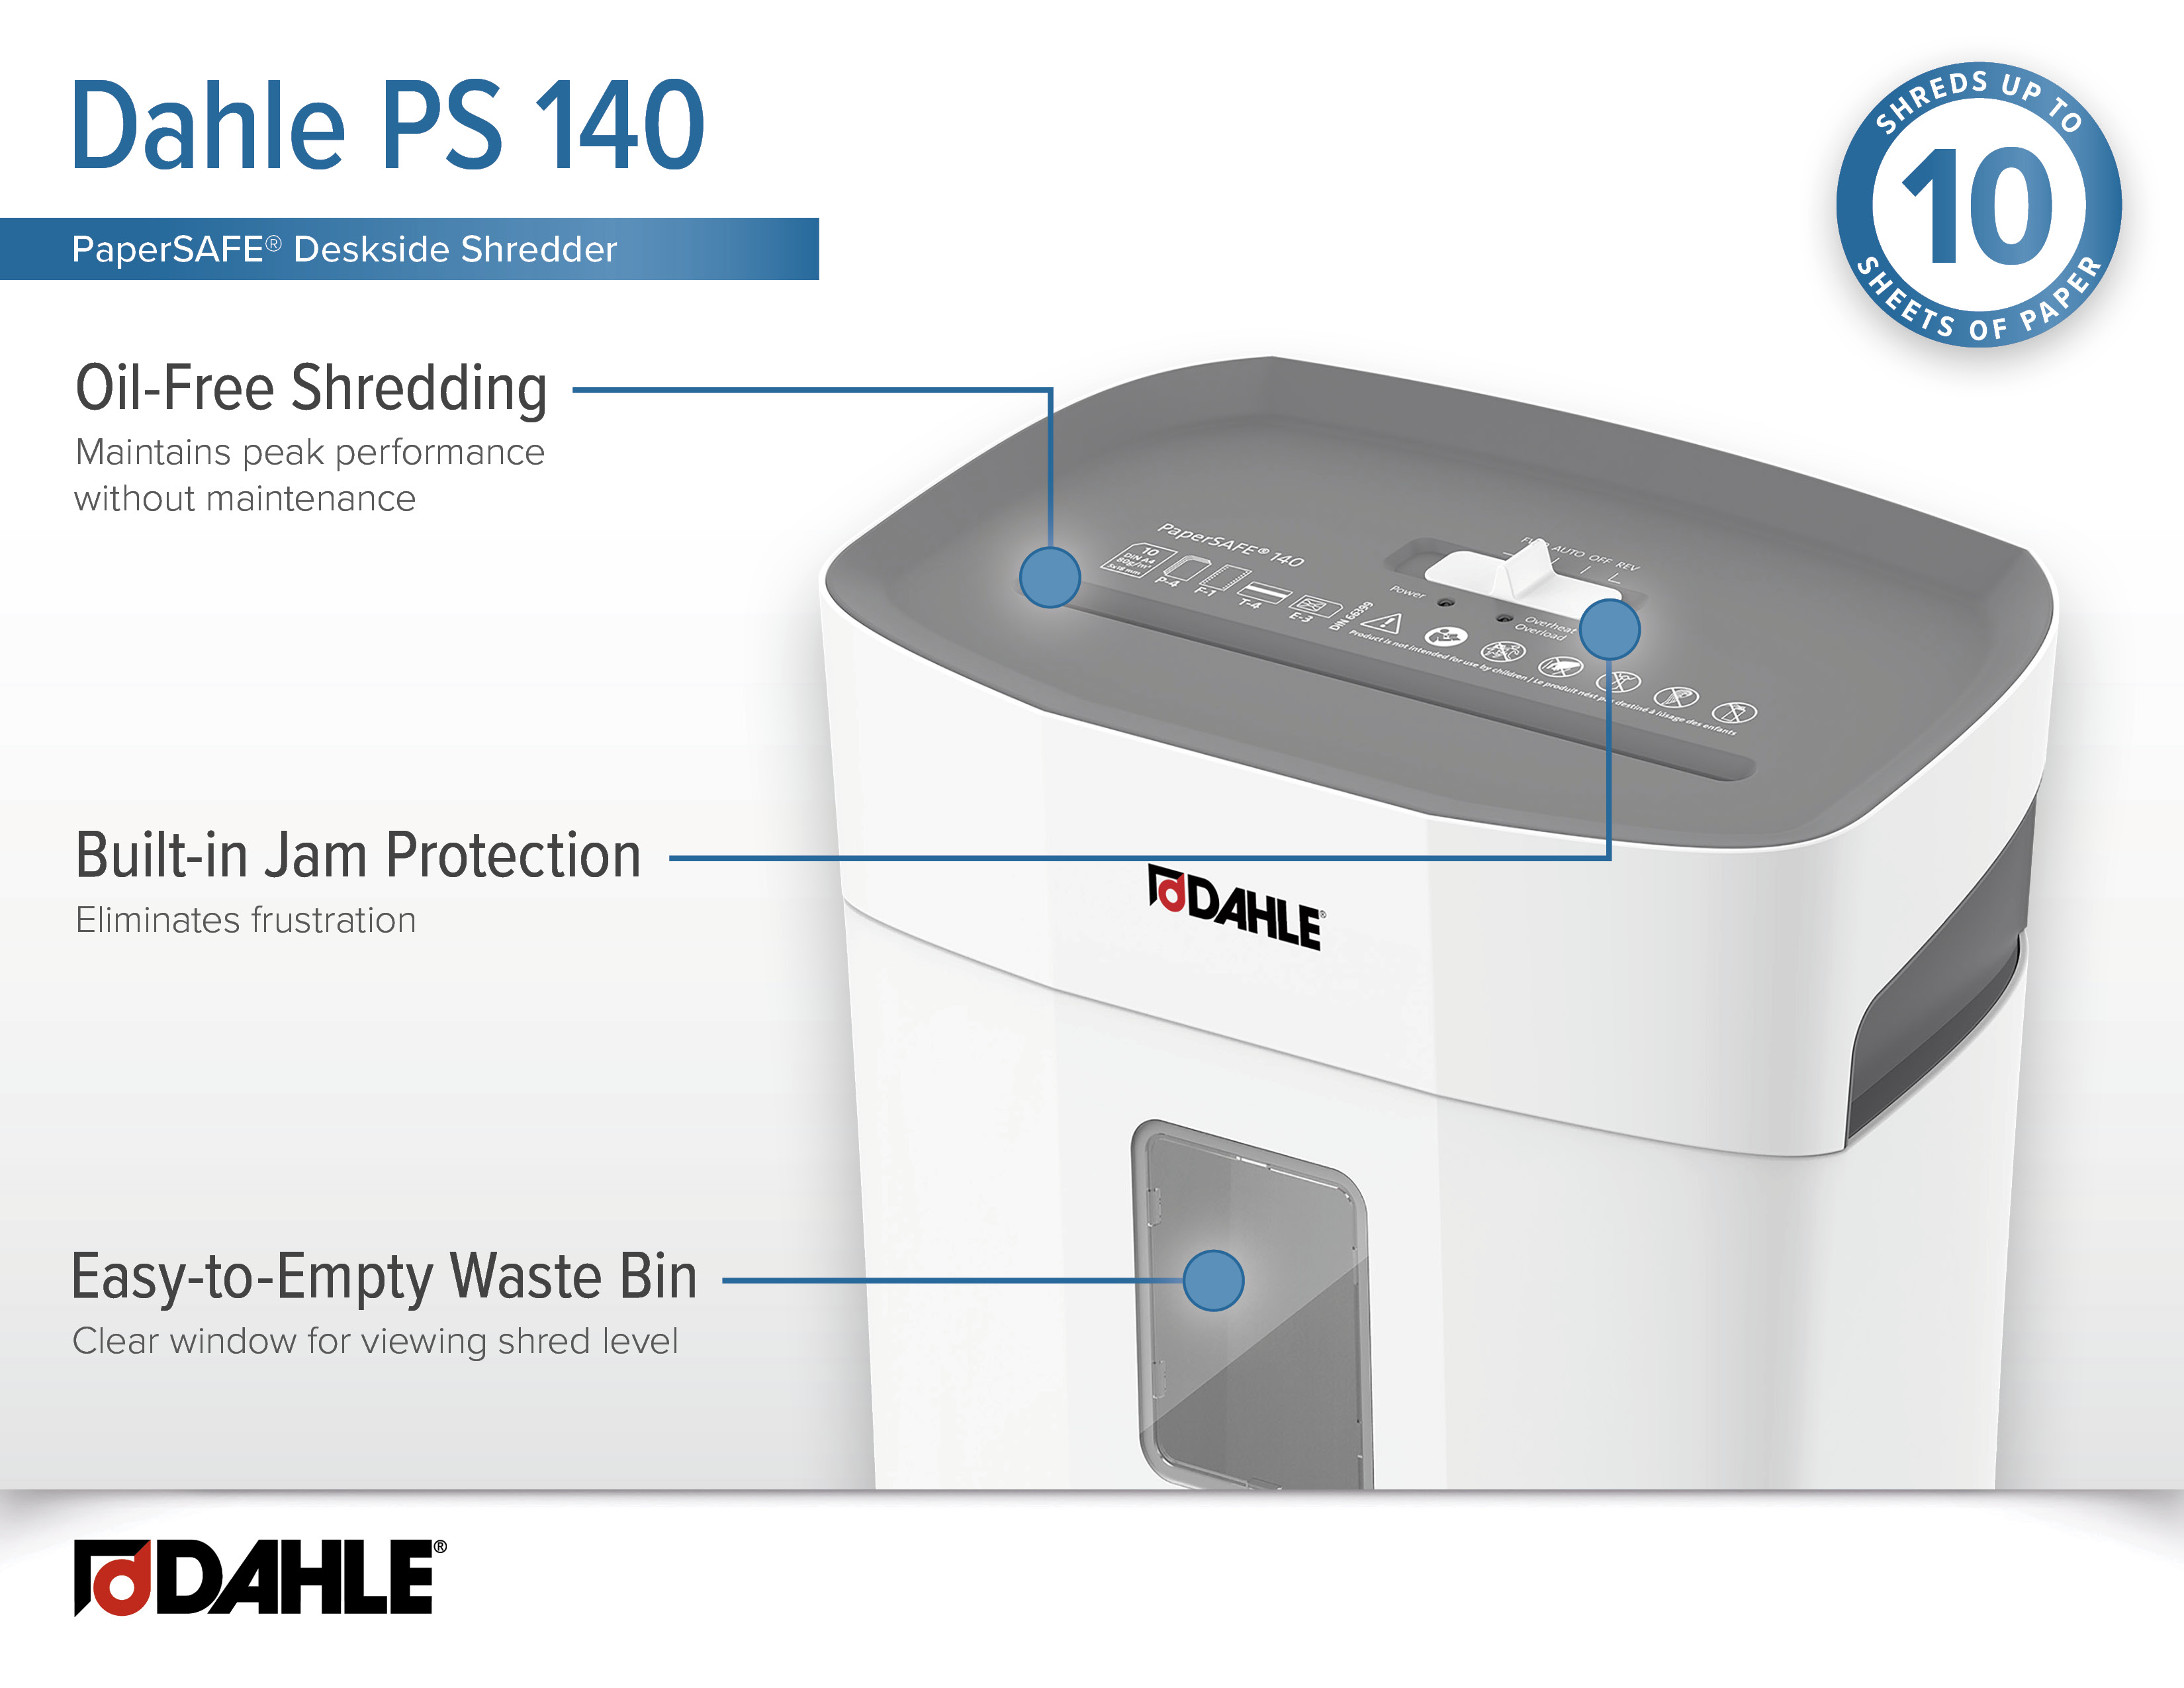 Dahle PaperSAFE 140 Infographic